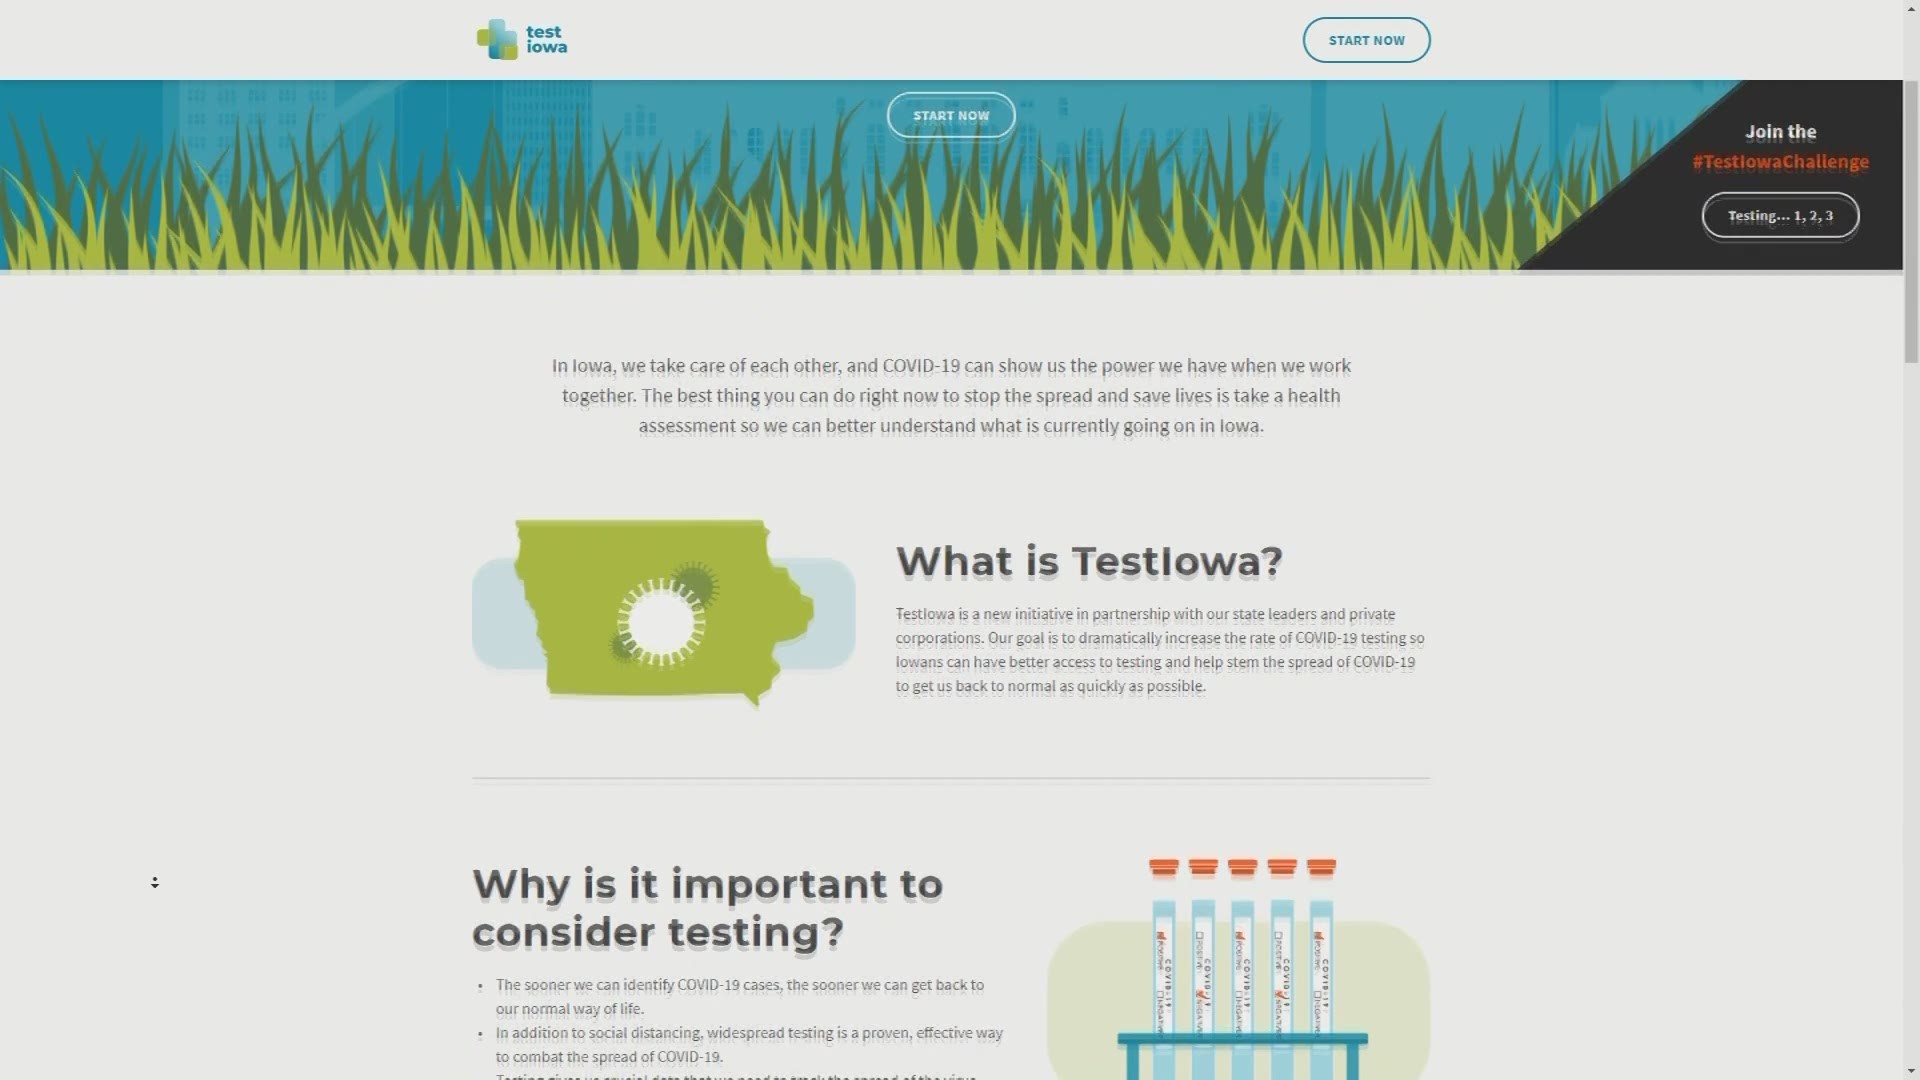 For more information and to fill out the assessment, go to testiowa.com.